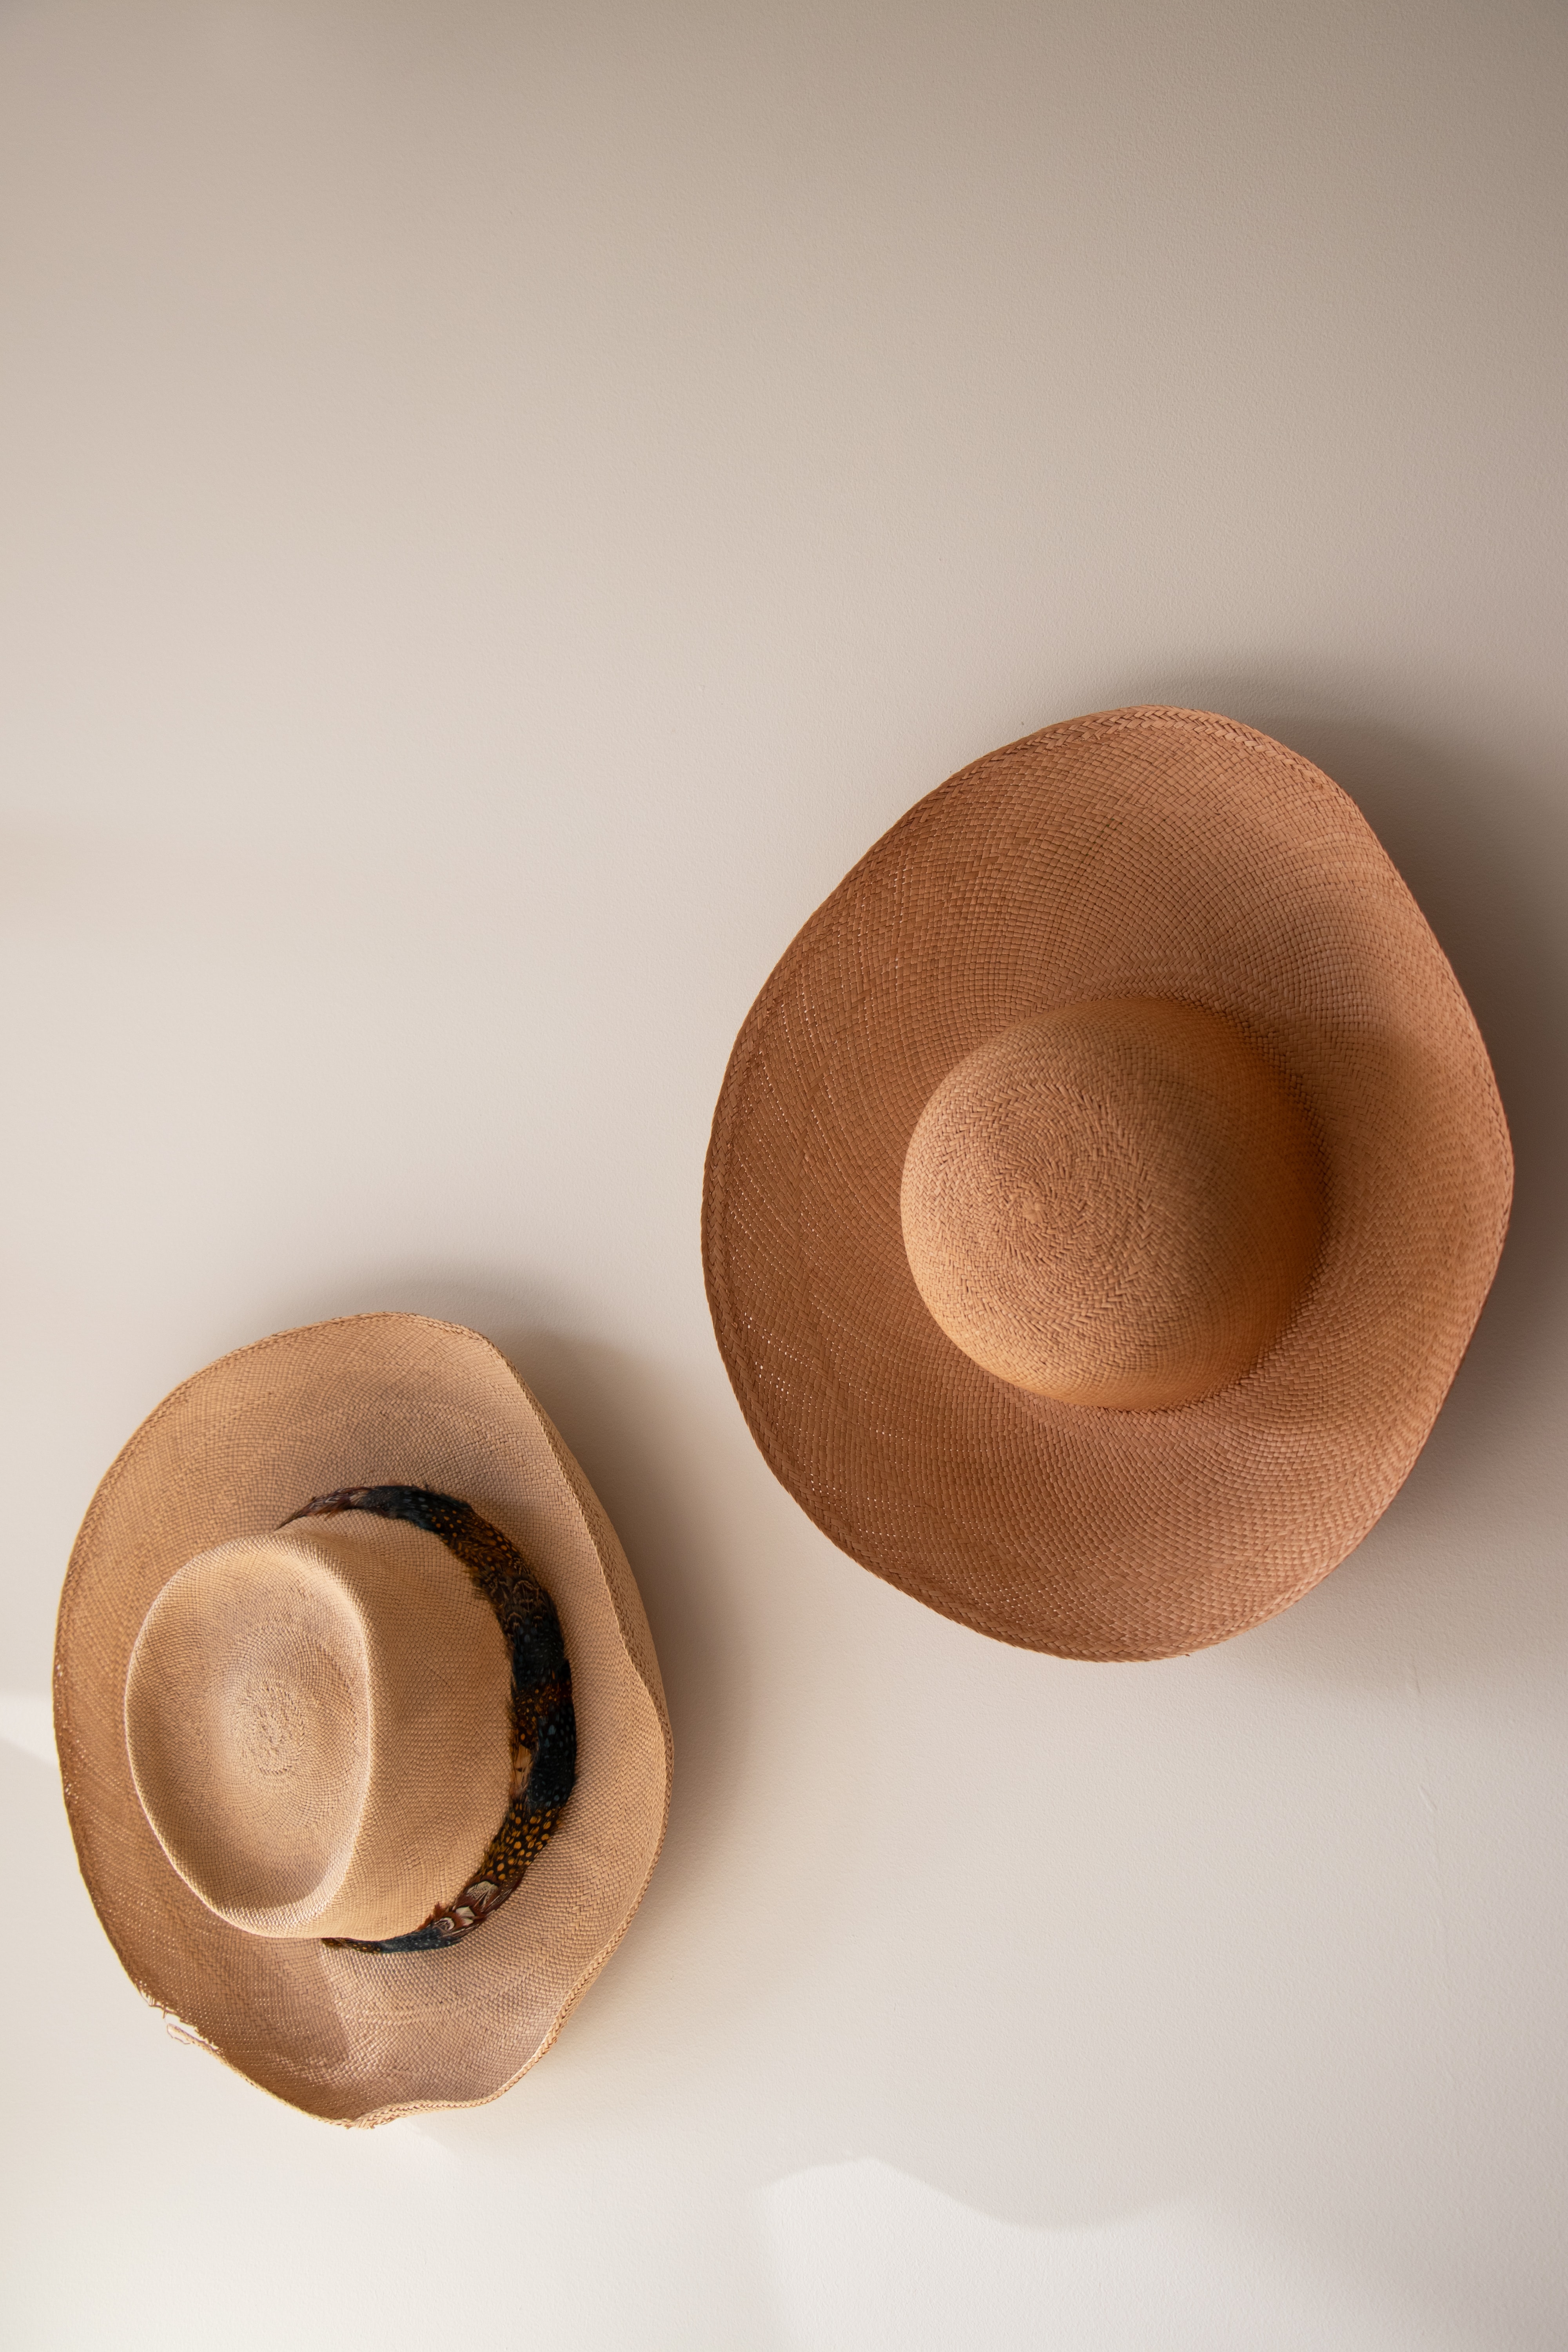 Two hats